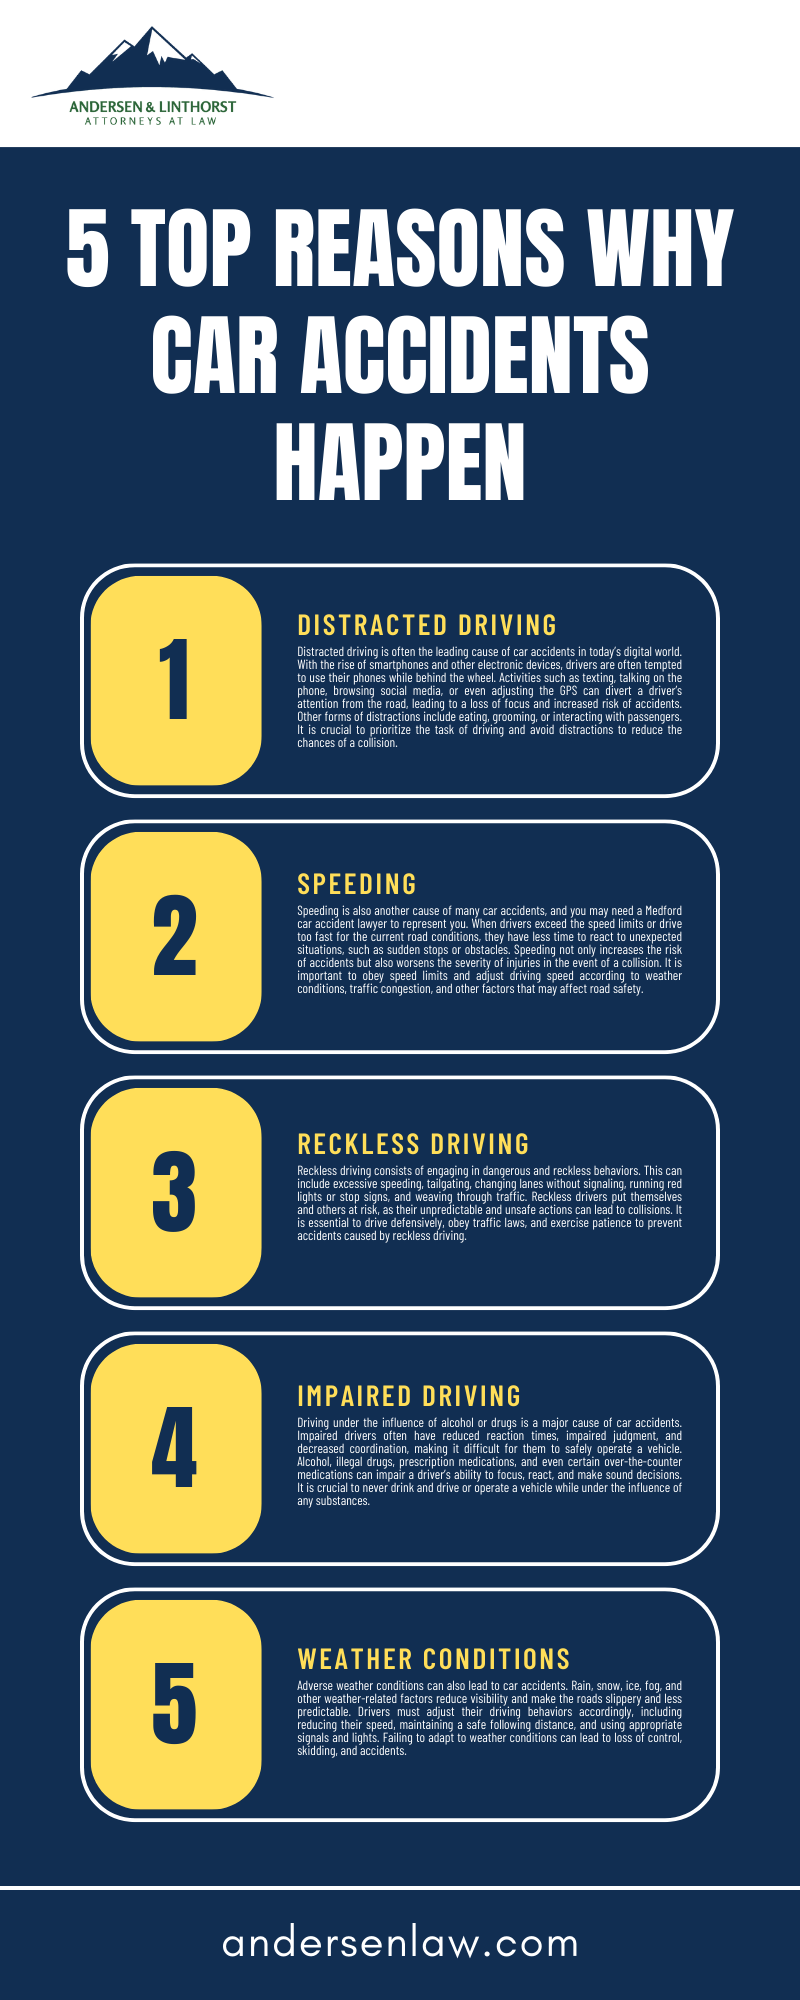 5 Top Reasons Why Car Accidents Happen Infographic